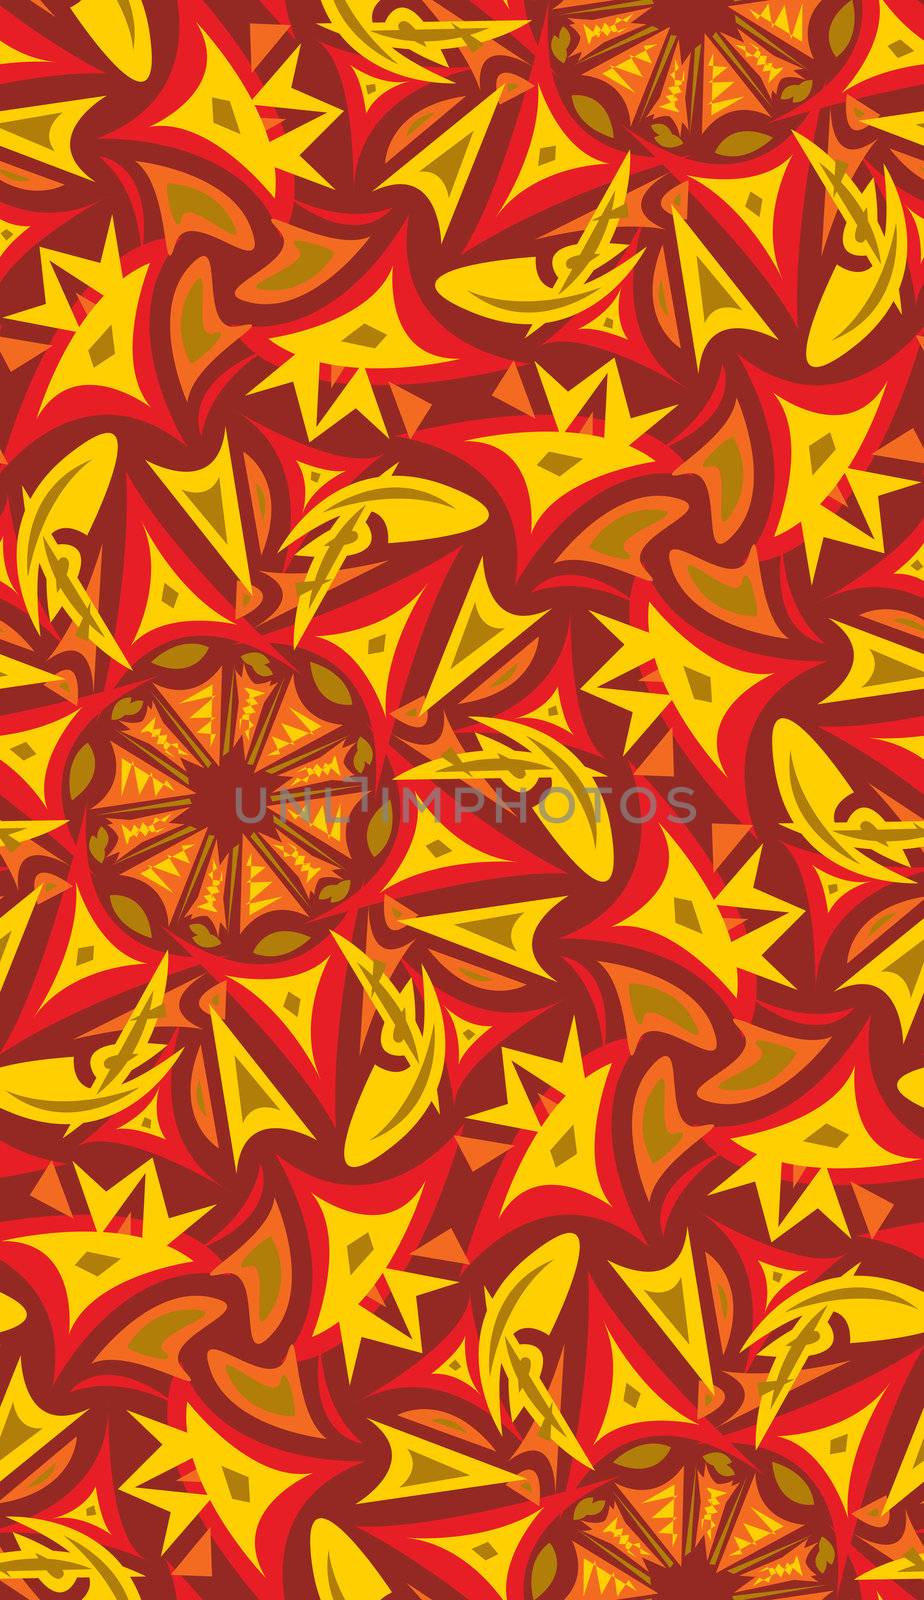 Autumnal Spark Pattern by TheBlackRhino